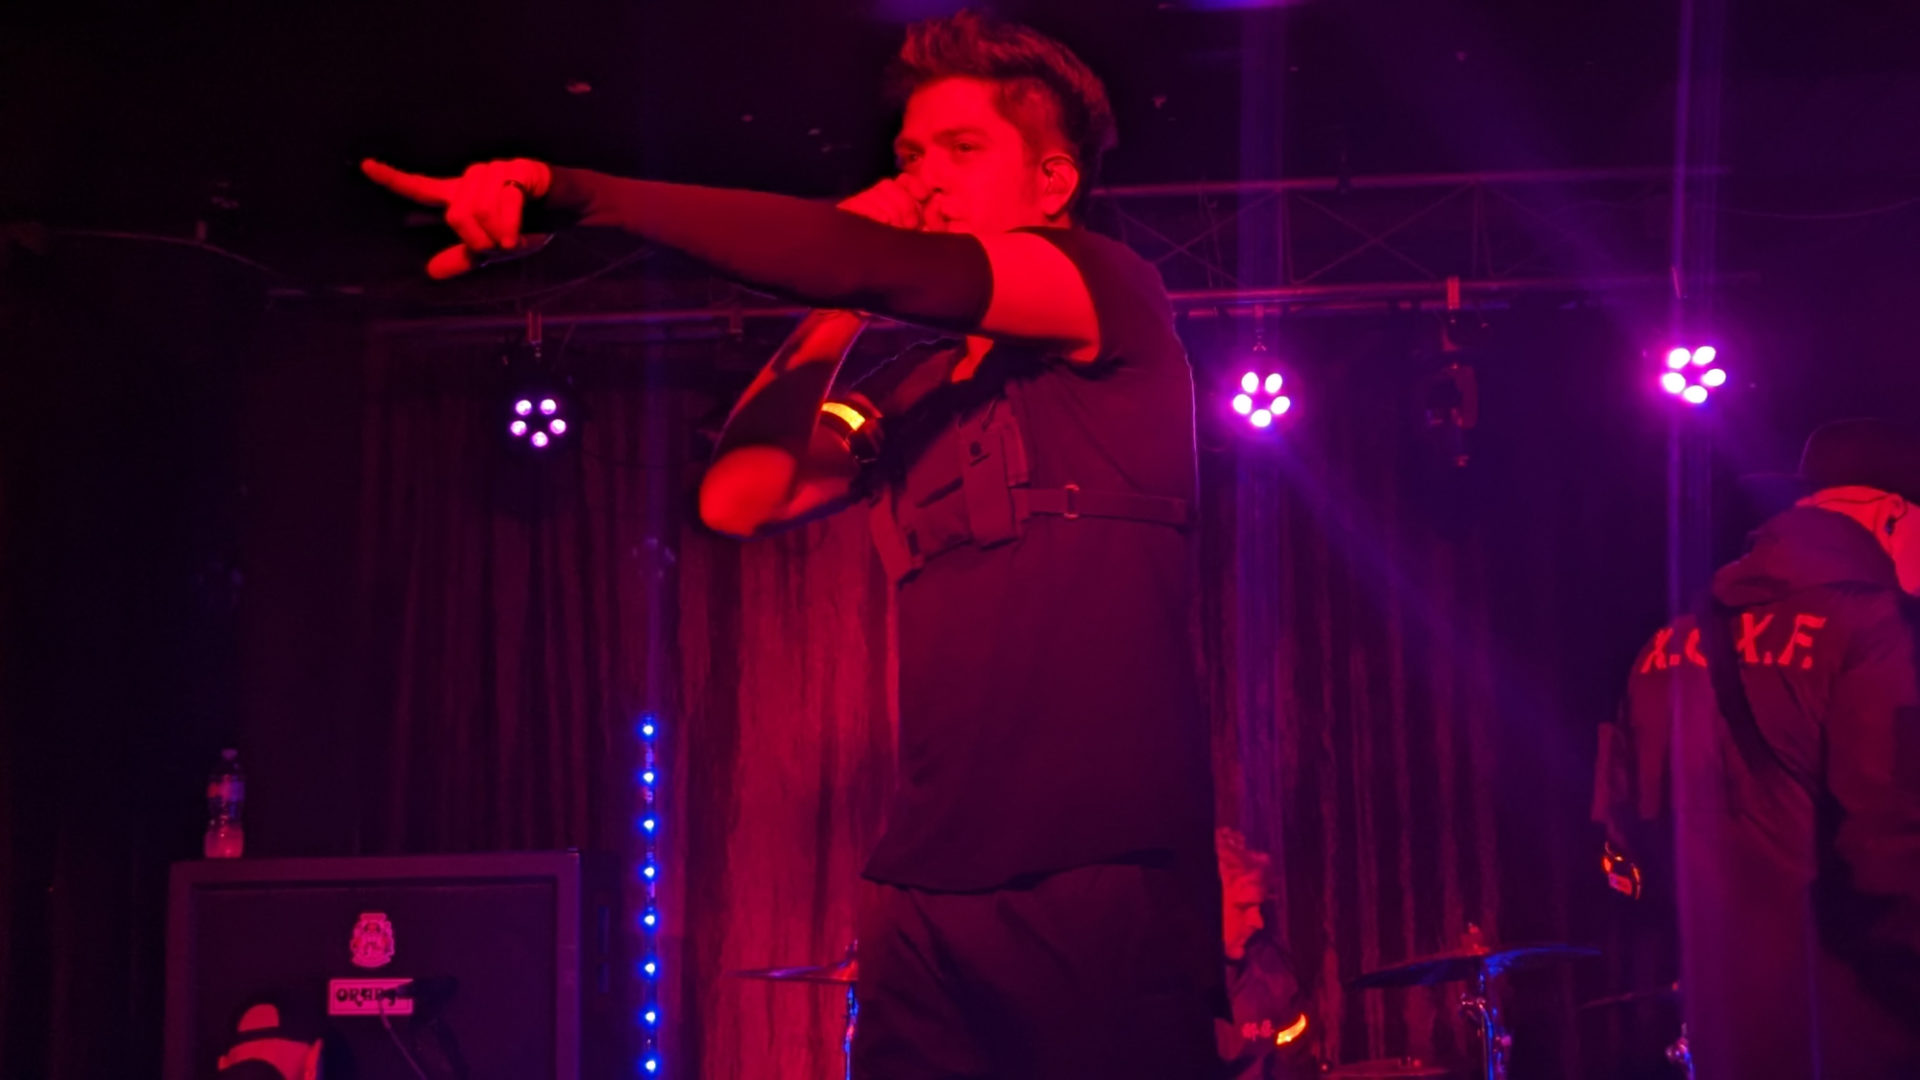 The lead singer of the band Versus Me, James Milbrandt on stage during a performance at the Canopy Club. He is wearing all black, with a black arm sleeve on his left arm. That arm is extended out, point to the crowd. He holds the microphone up to his mouth with his right hand. The lightings is red and pink and purple.